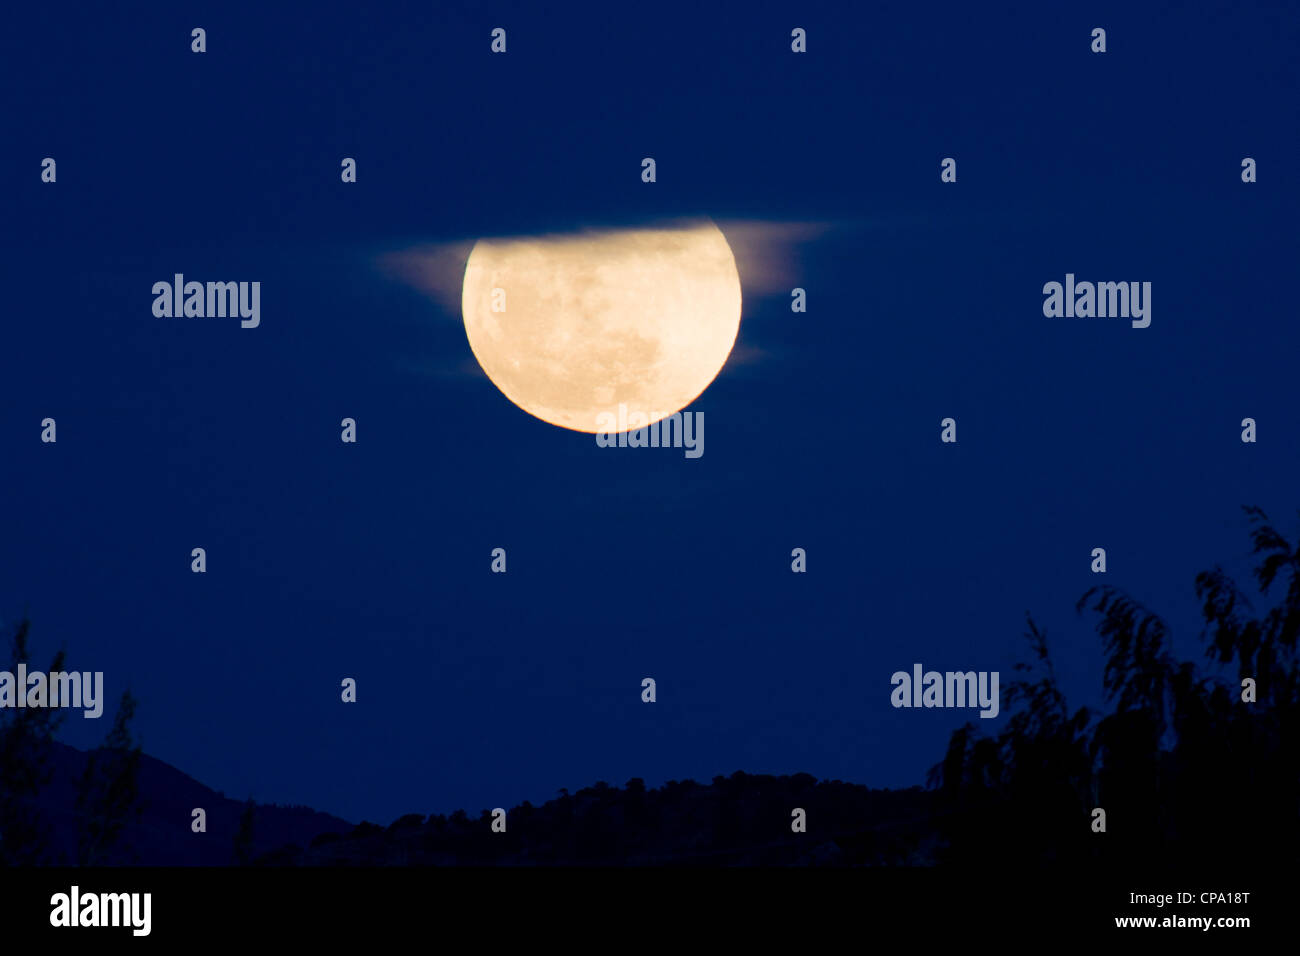 Perigree full moon, or supermoon, rises over Salida, Colorado, USA. Moon is closer to earth in orbit than normal. Stock Photo